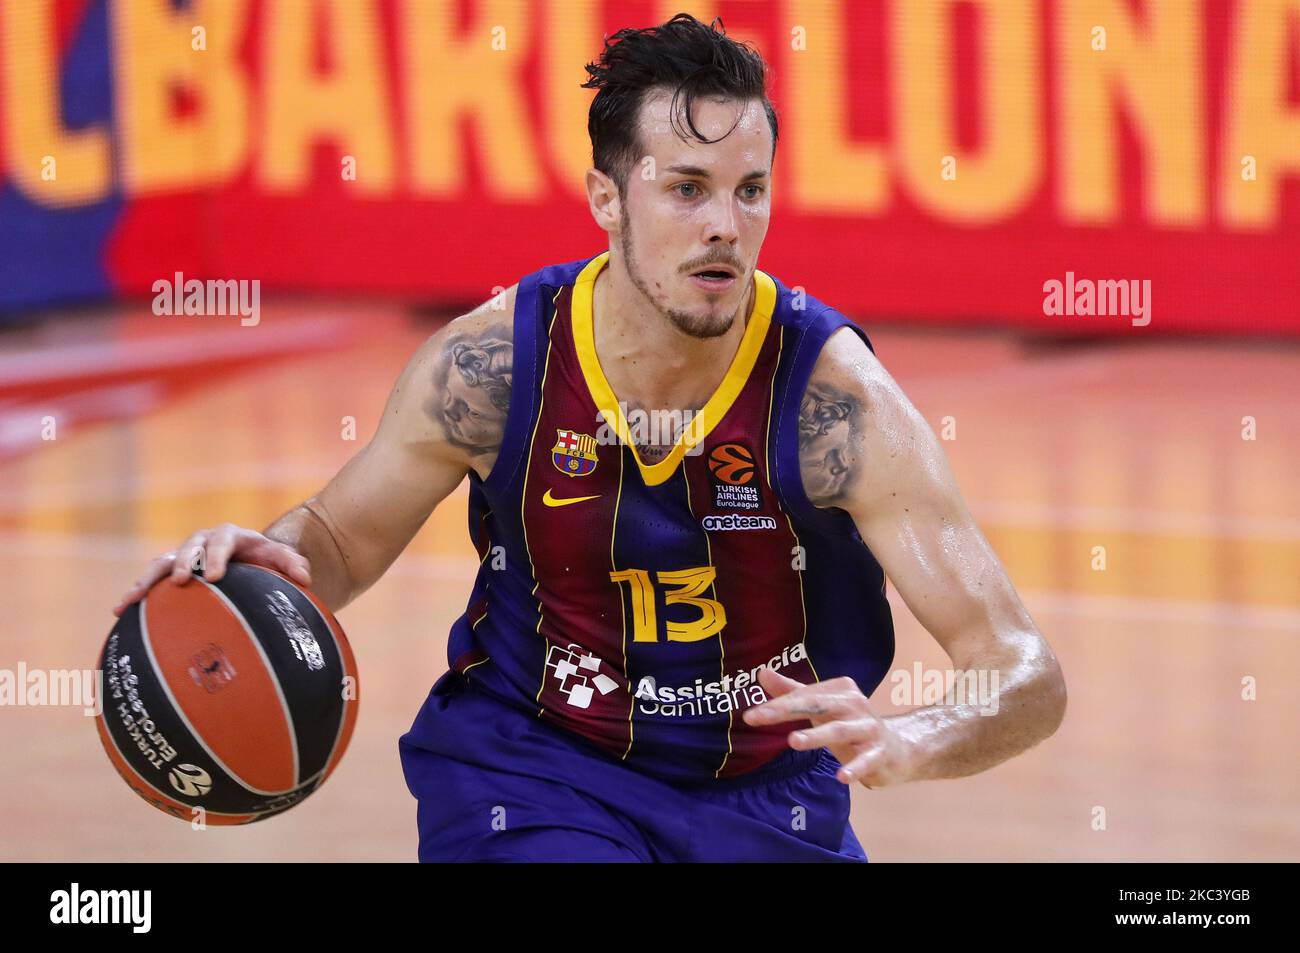 Thomas Heurtel during the match between FC Barcelona and Fenerbahce  Basketball, corresponding to the week 8 of the Euroleague, played at the  Palau Blaugrana, on 12th November 2020, in Barcelona, Spain. Photo: